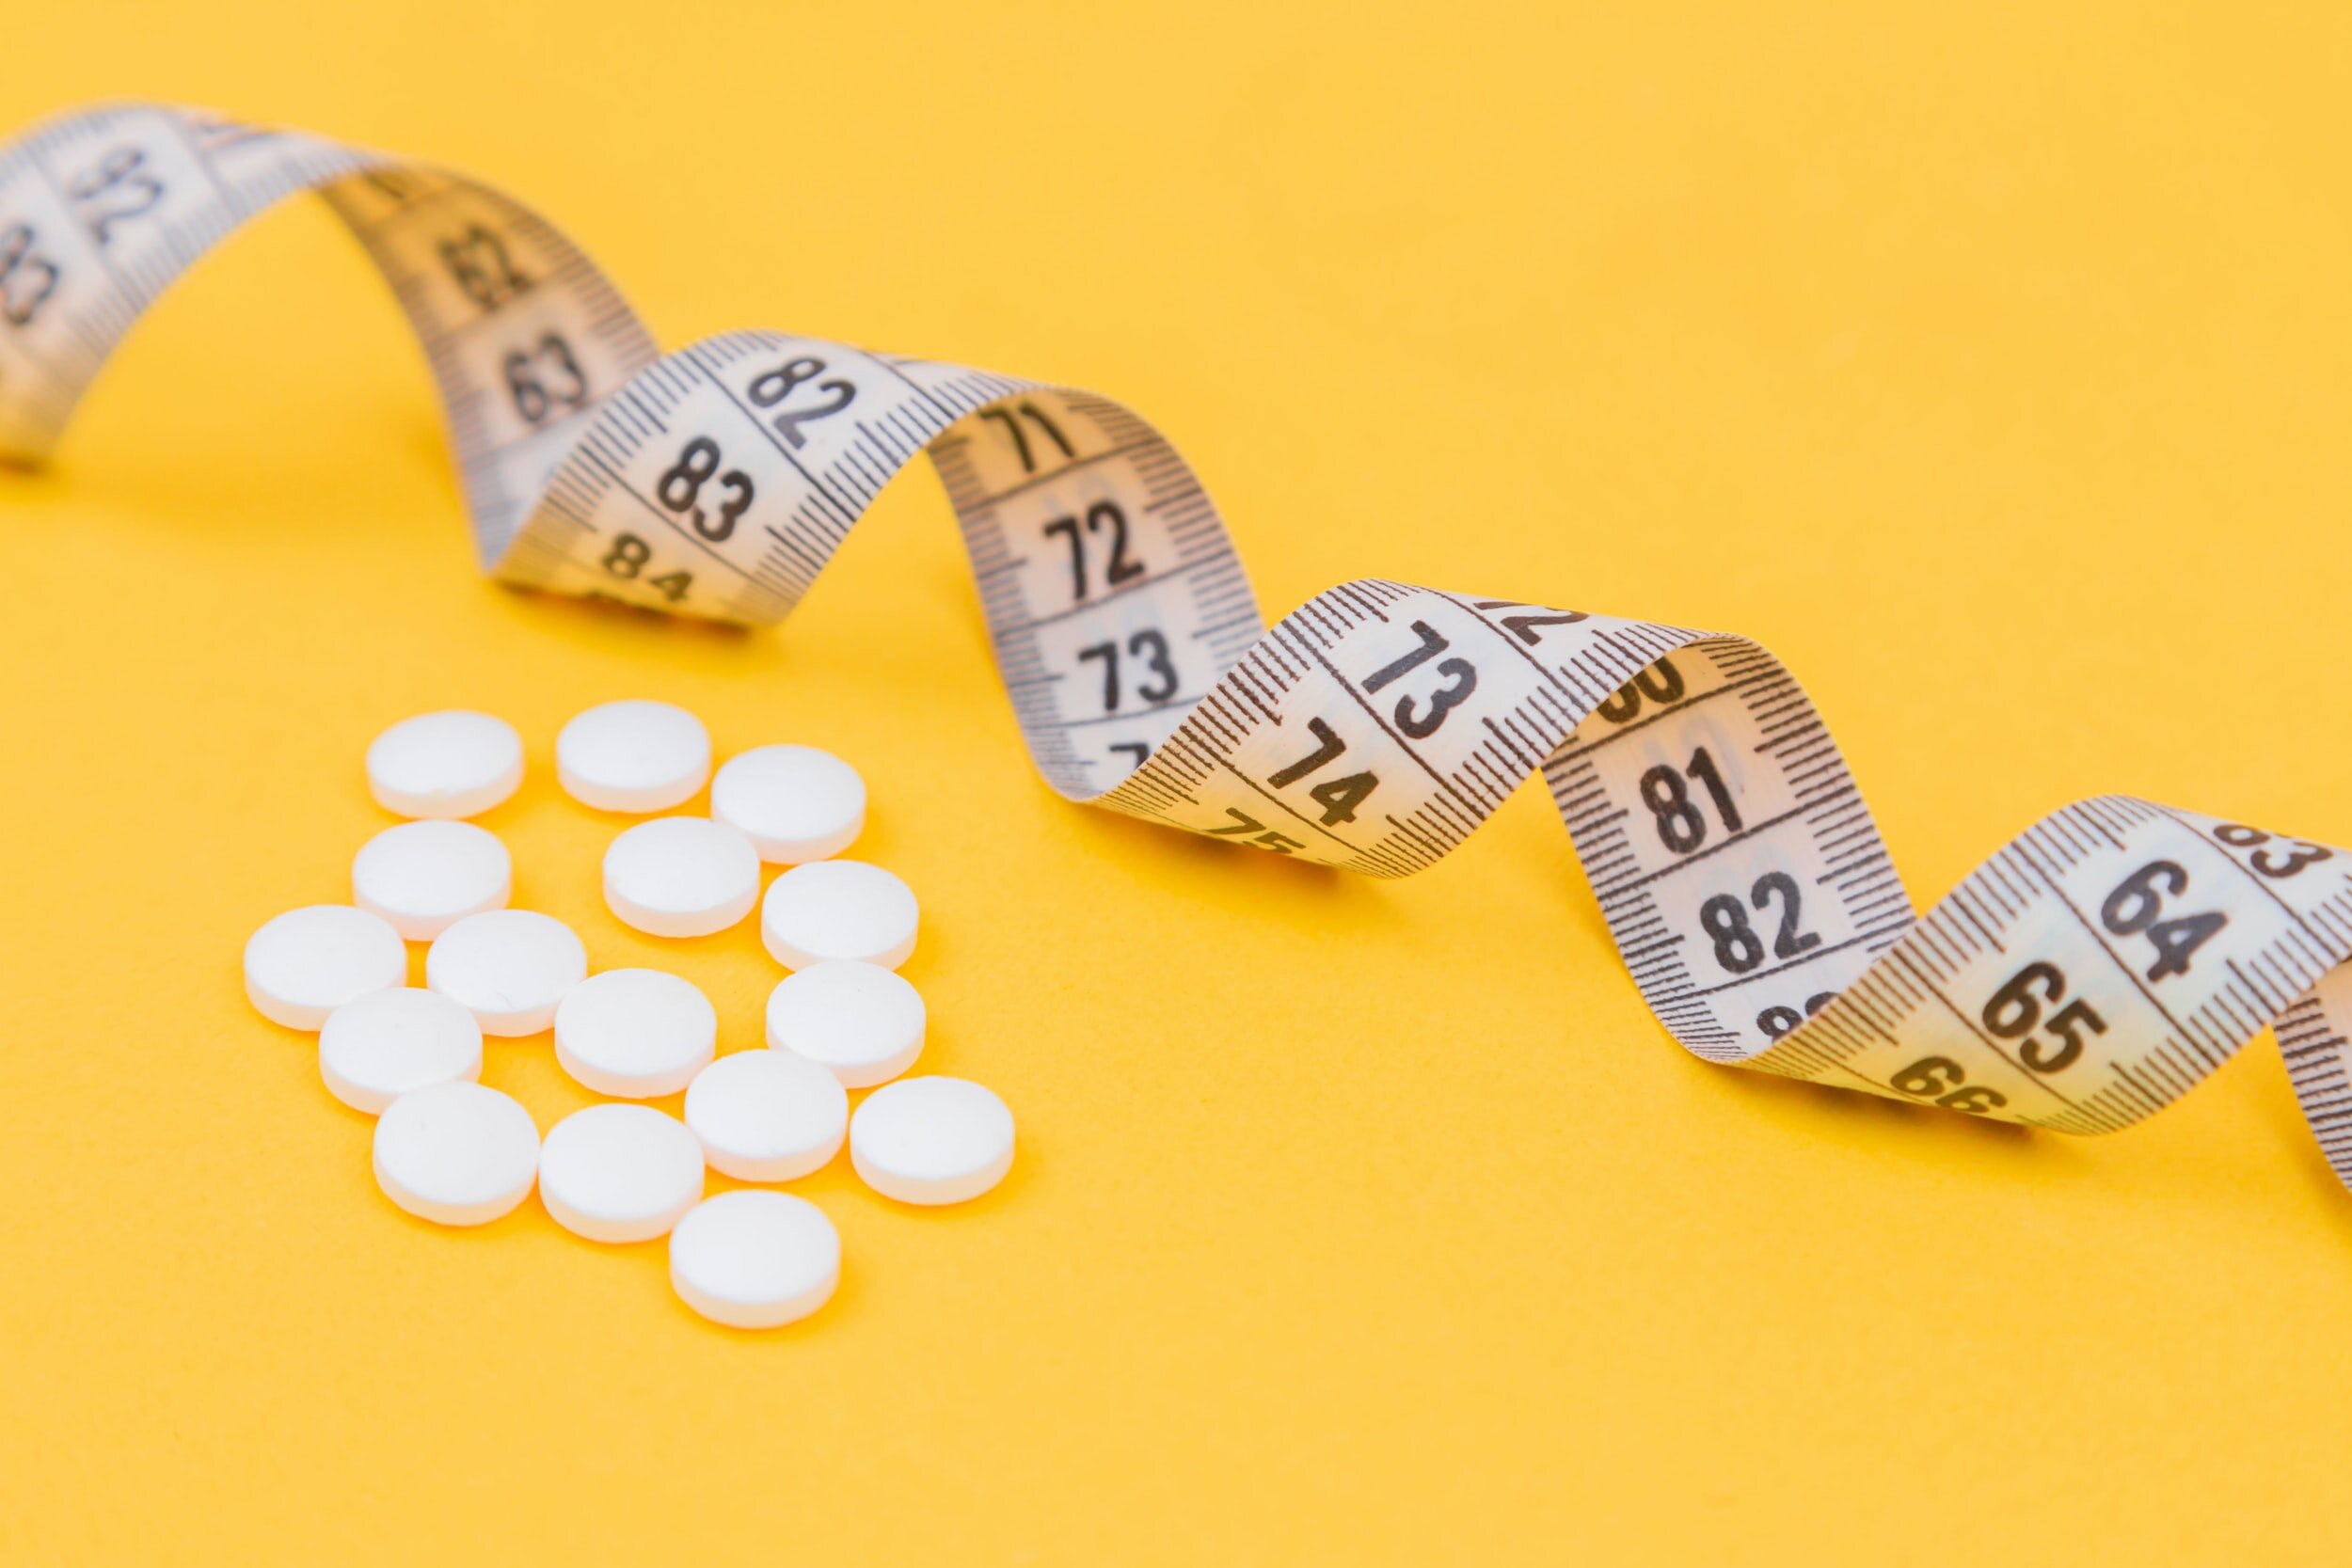 Thinking About Using Diet Pills or Laxatives to Lose Weight? Think Again.